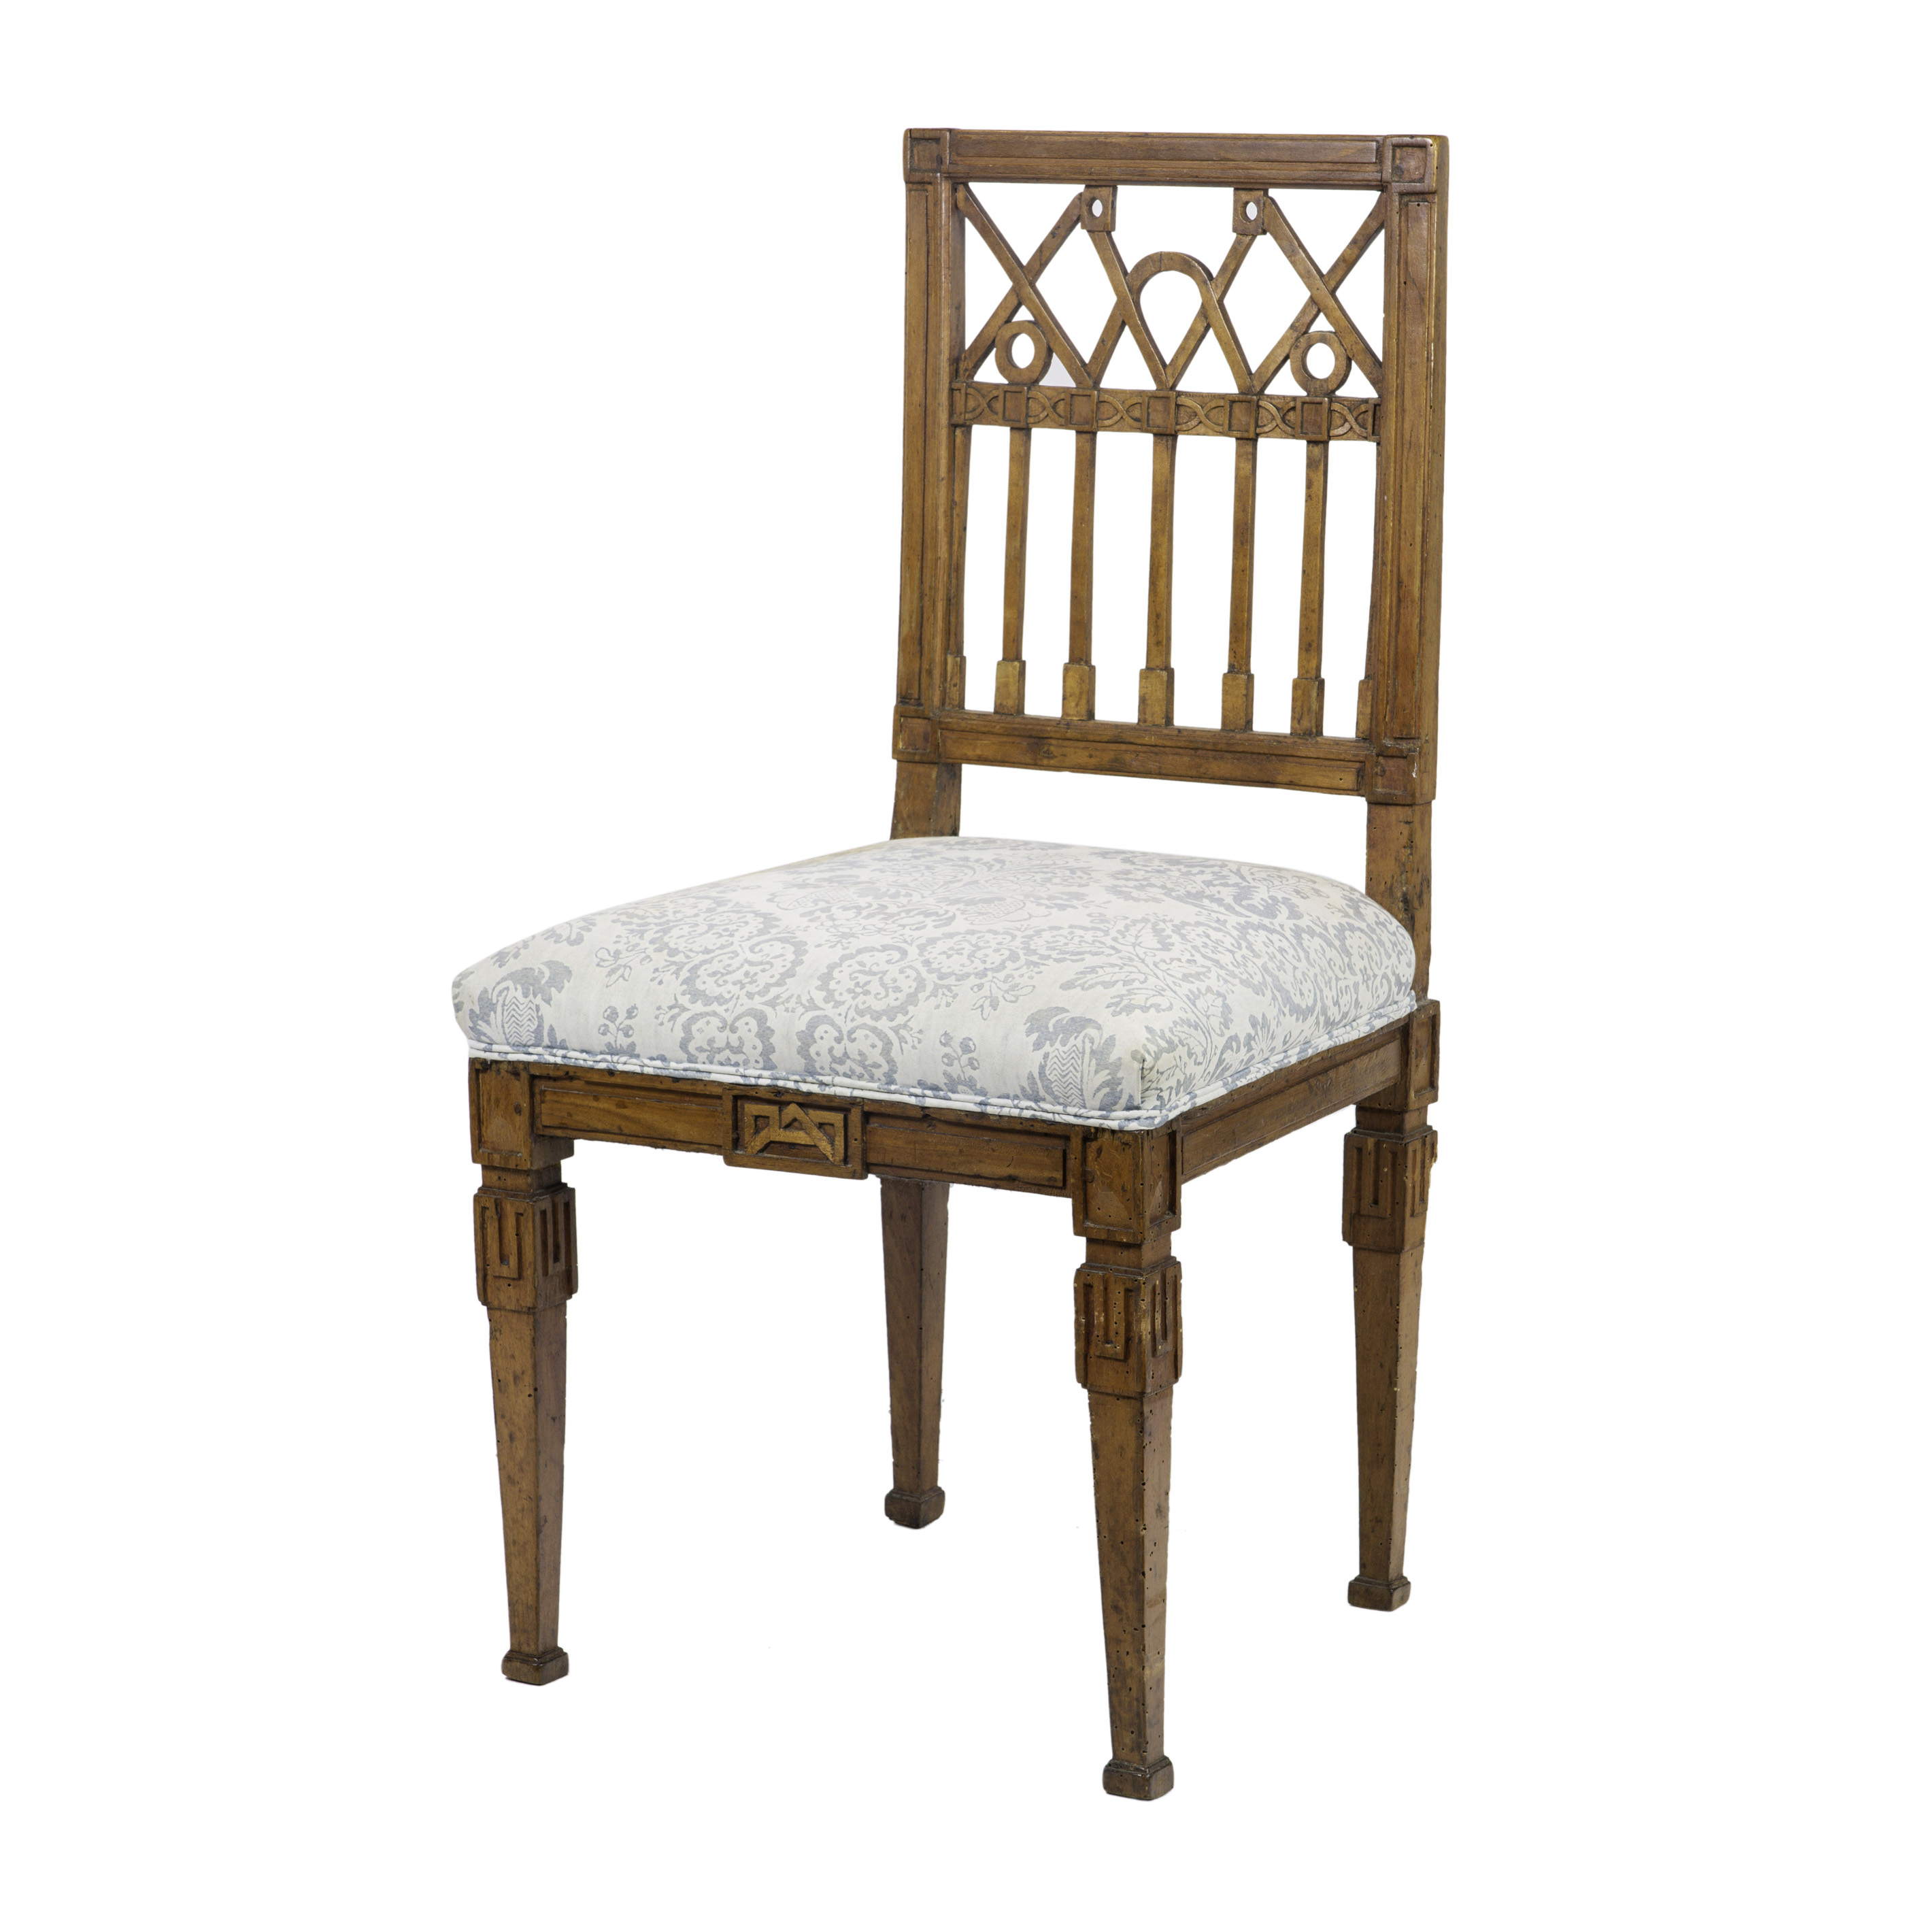 FRENCH NEOCLASSICAL SIDE CHAIR 3a4282